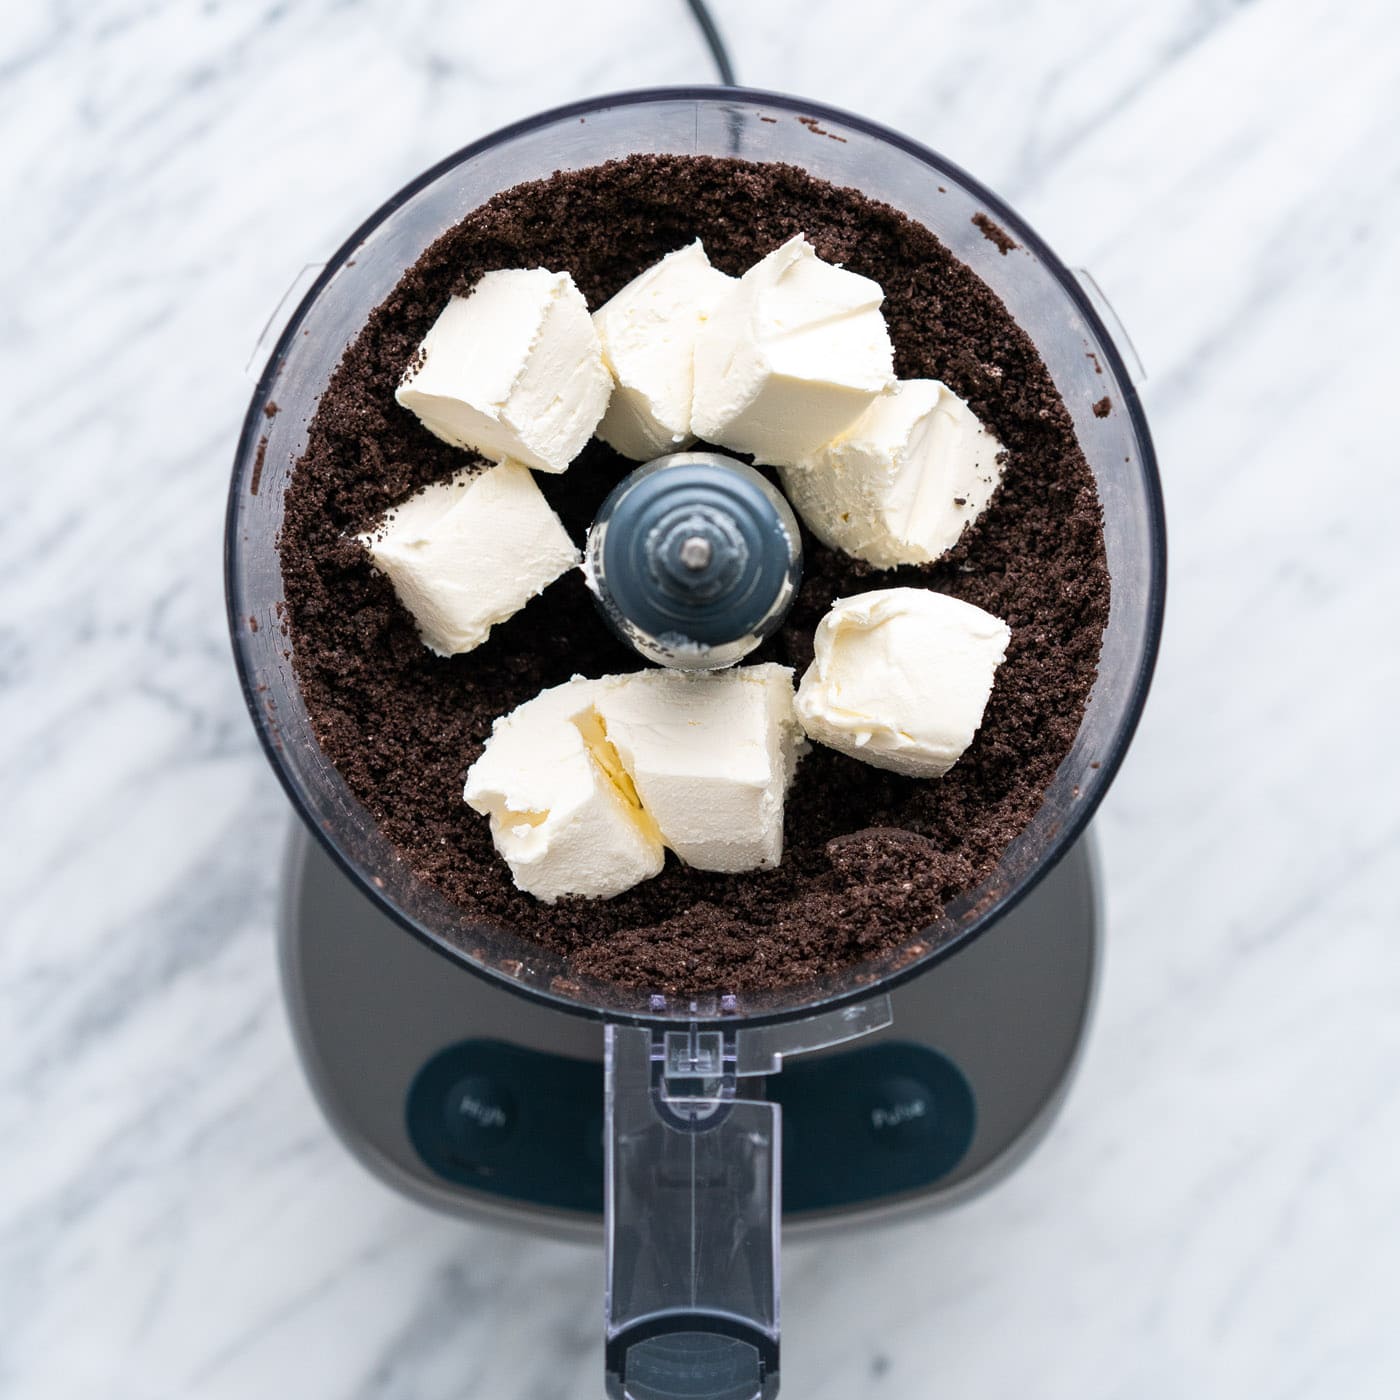 cubed cream cheese added to food processor with oreos